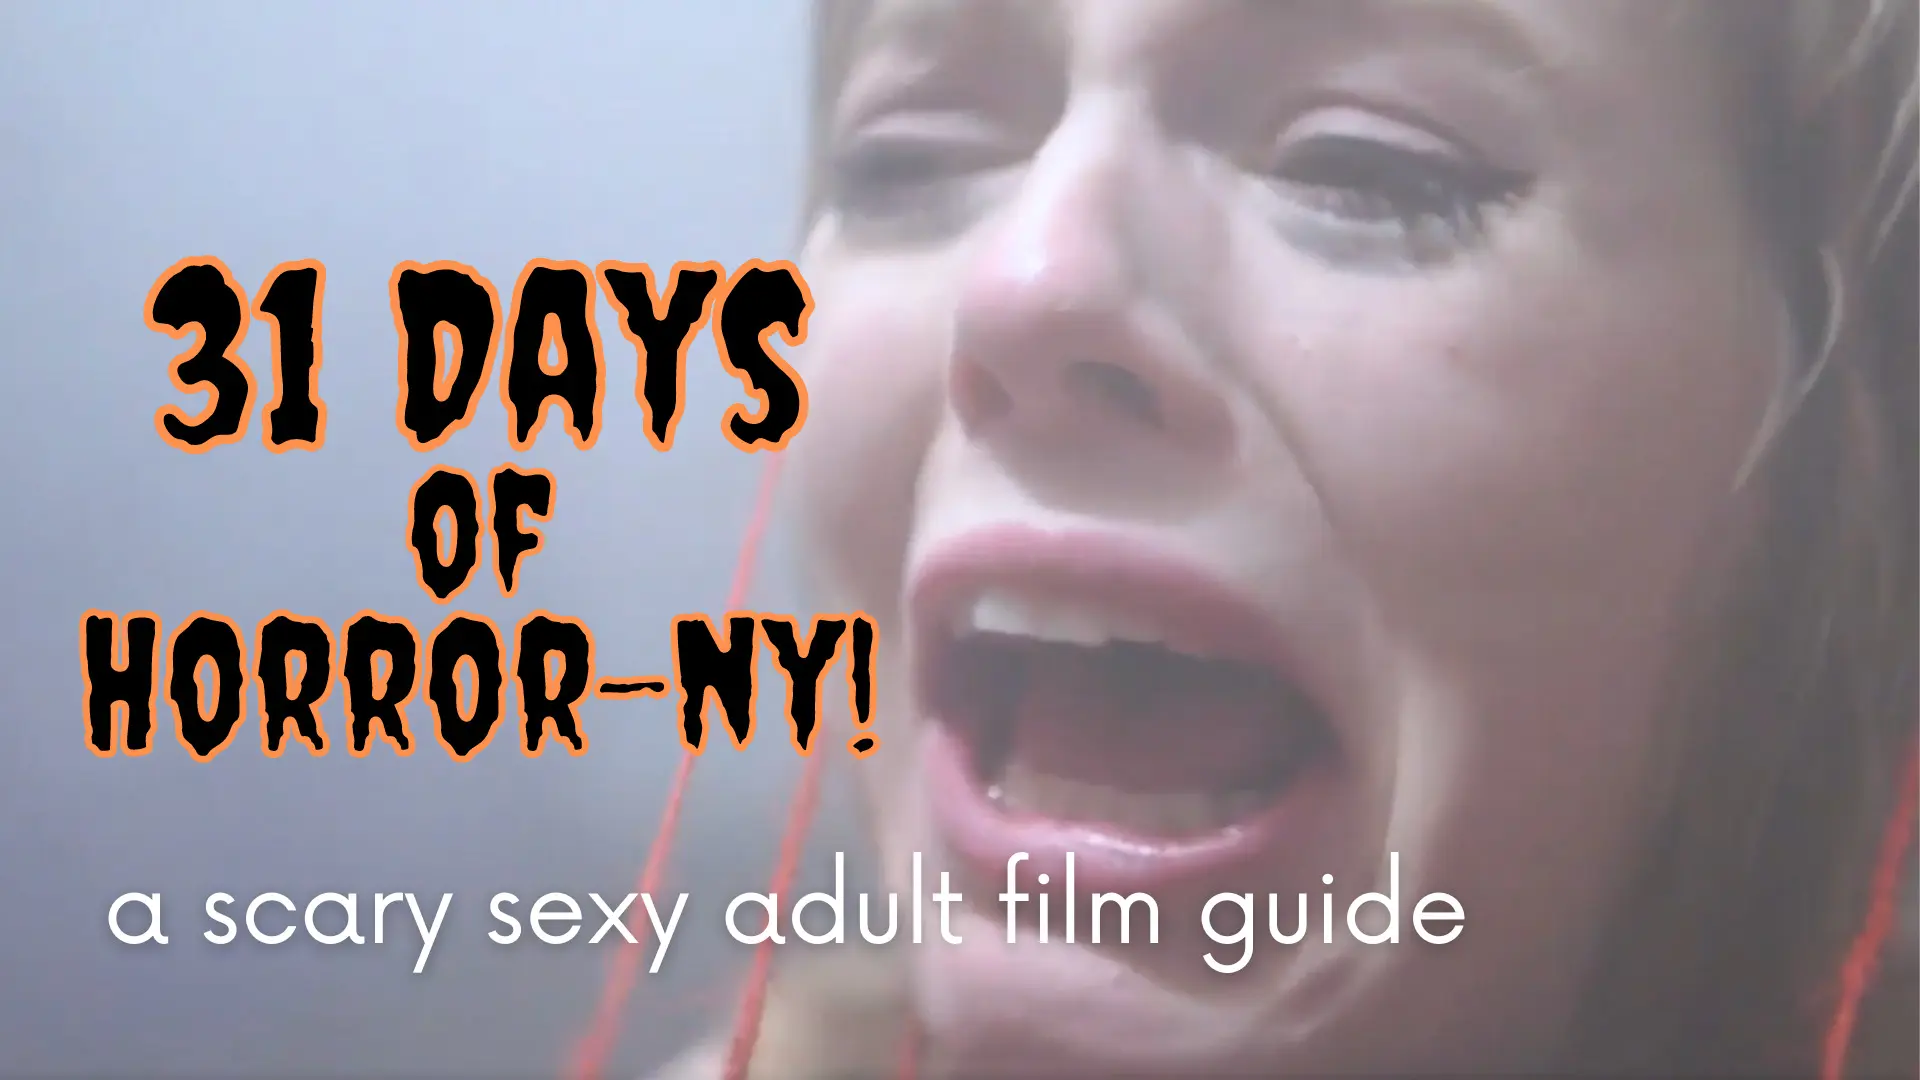 Hot Horrer Sex In Jungle - 31 Days of Horror-ny! Scary Sexy Adult Films - PinkLabel.TV